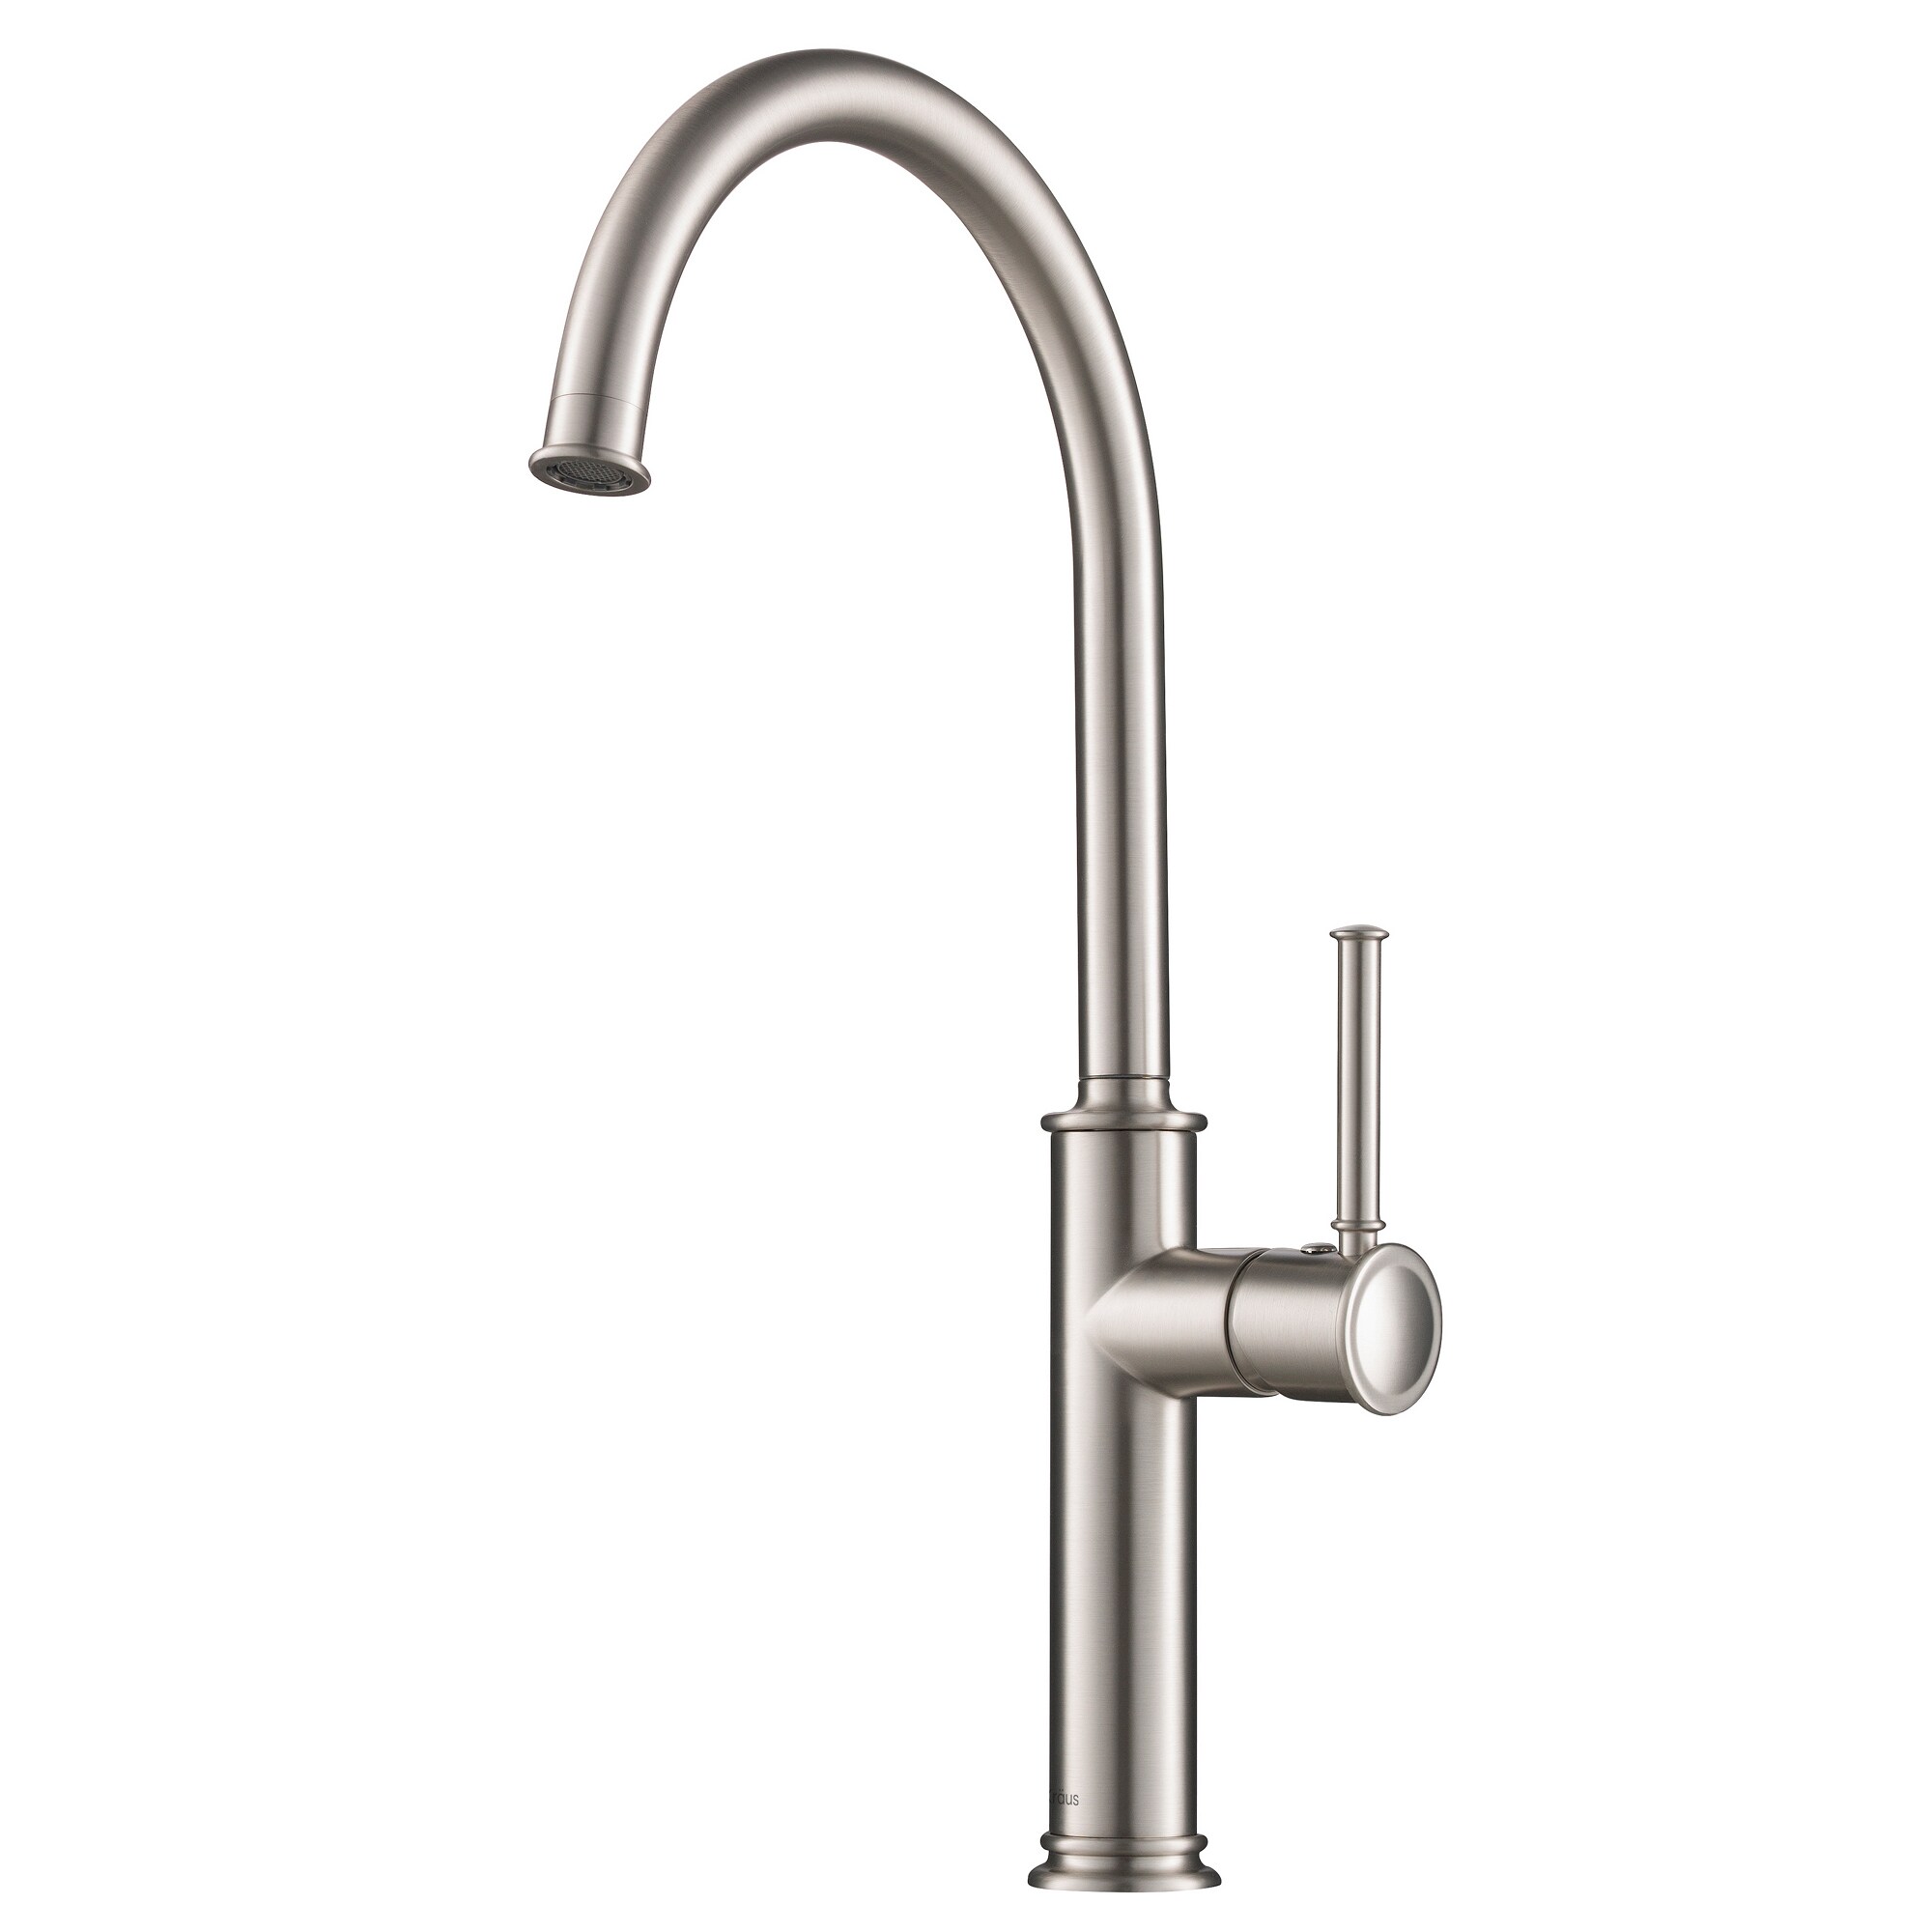 Kraus Sellette Spot Free Stainless Steel Single Handle Bar and Prep Kitchen Faucet with Sprayer Function